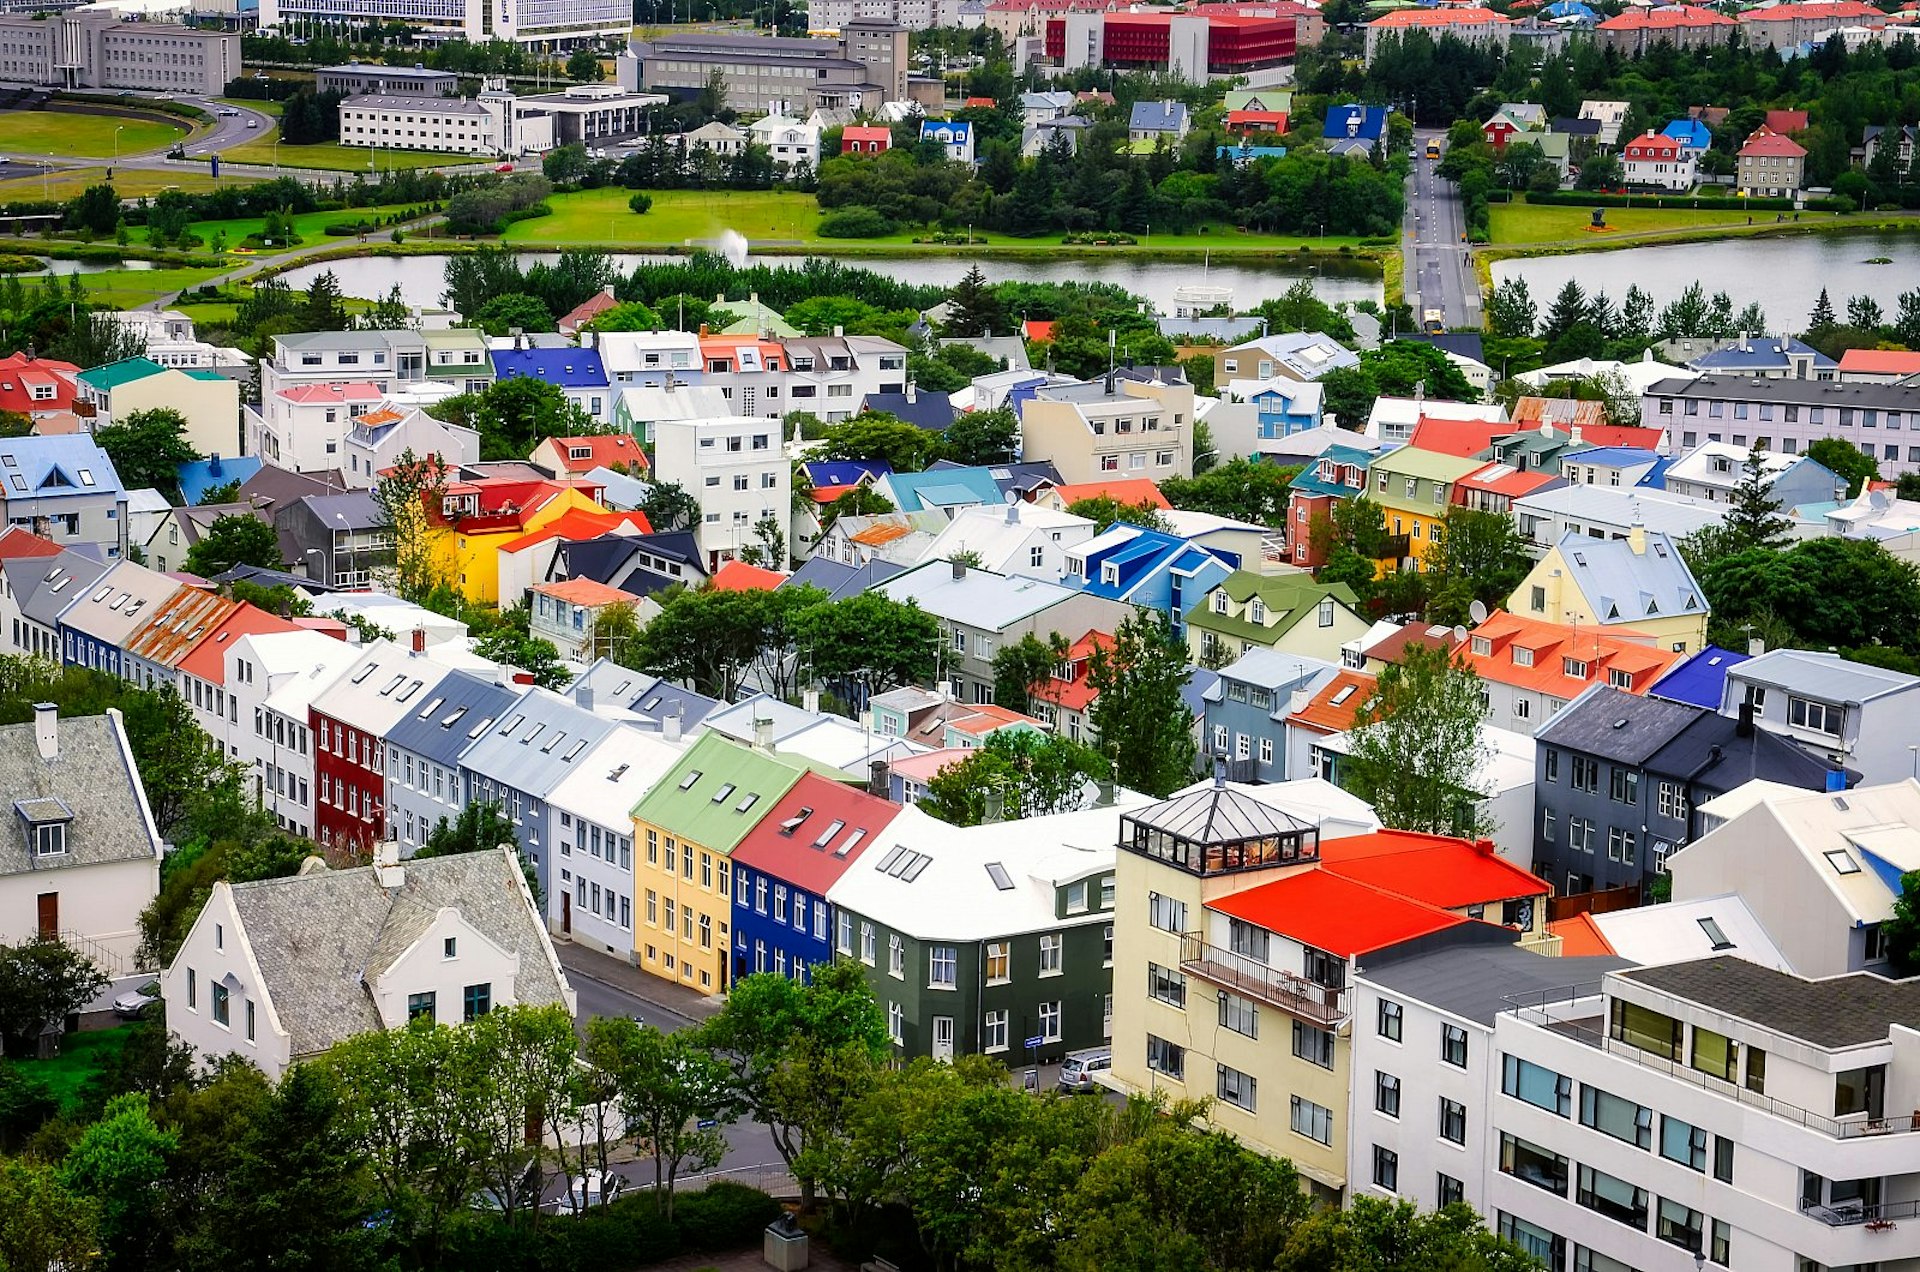 Aerial view of a cluster of colourful houses in a leafy neighbourhood in Reykjavík, Iceland, with a river in the distance.